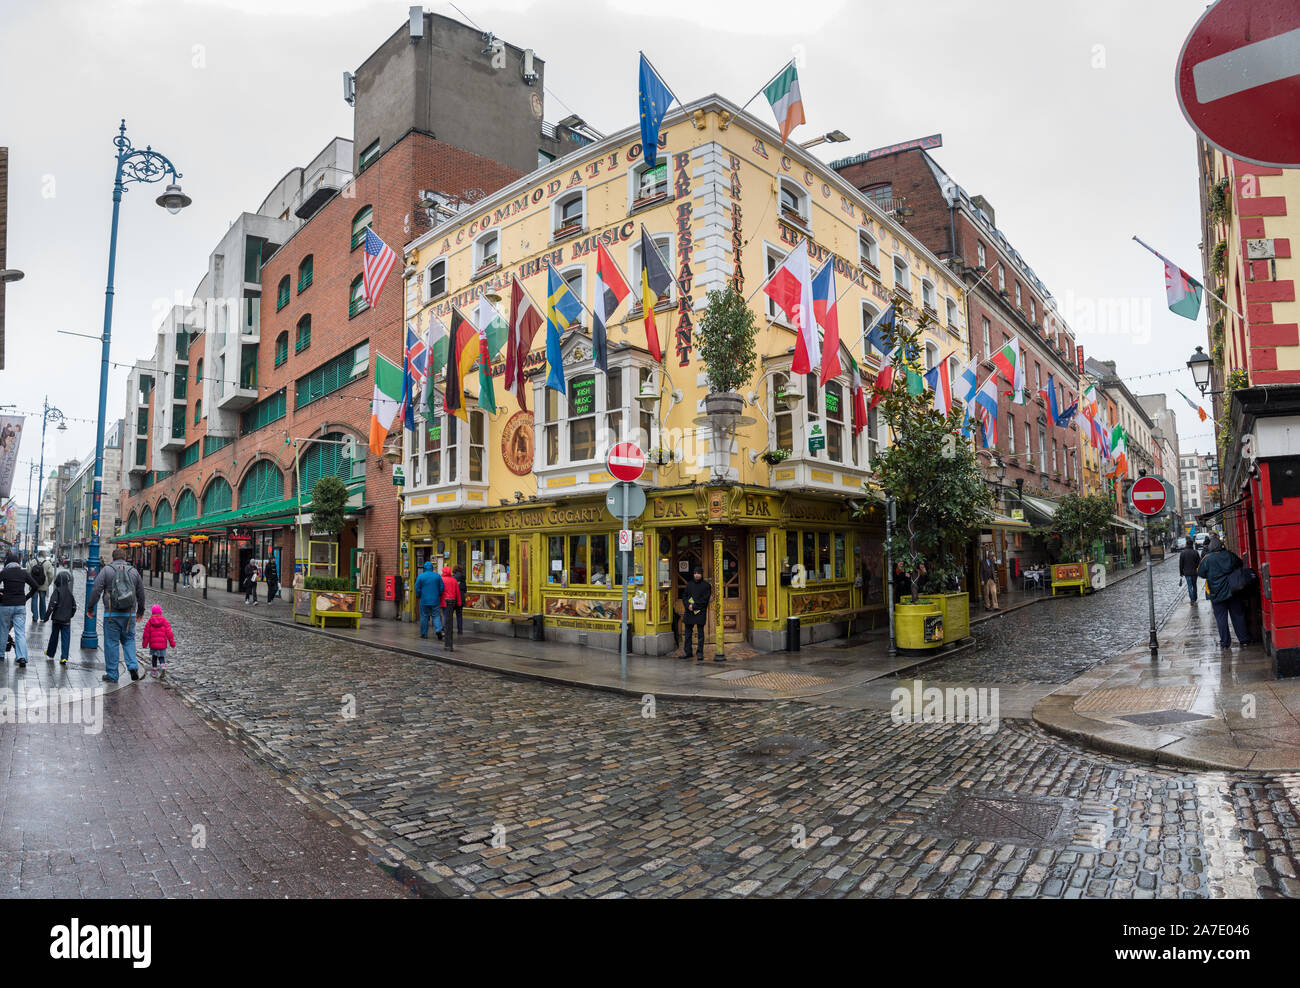 TEMPLE BAR STREET, DUBLIN, IRELAND - APRIL 02, 2015: The area is the location of many bars, pubs and restaurants in Dublin Stock Photo